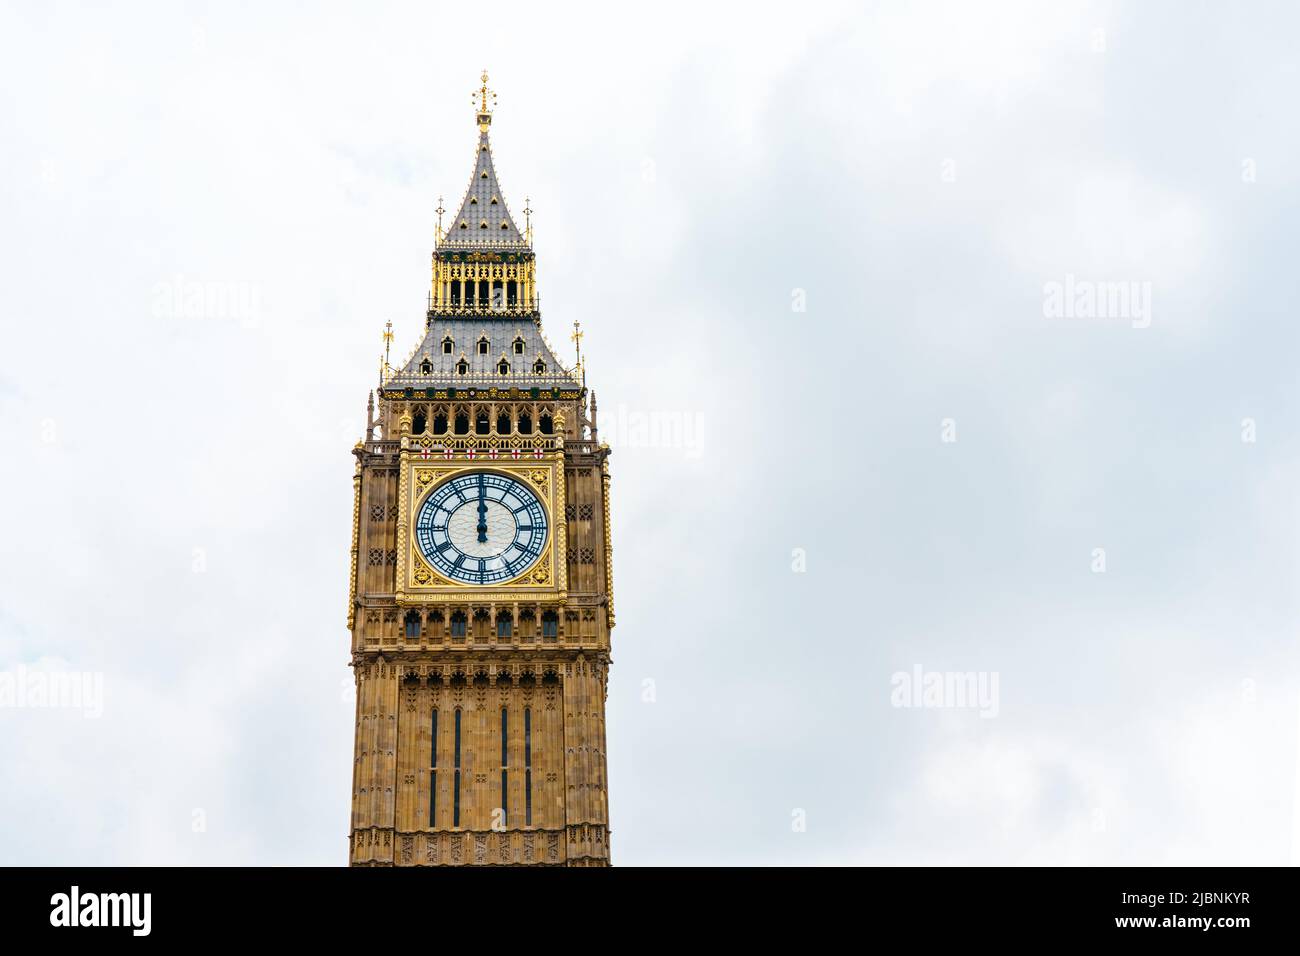 Big Ben, London, UK. A view of the popular London landmark, the clock tower known as Big Ben against a blue and cloudy sky. High quality photo Stock Photo